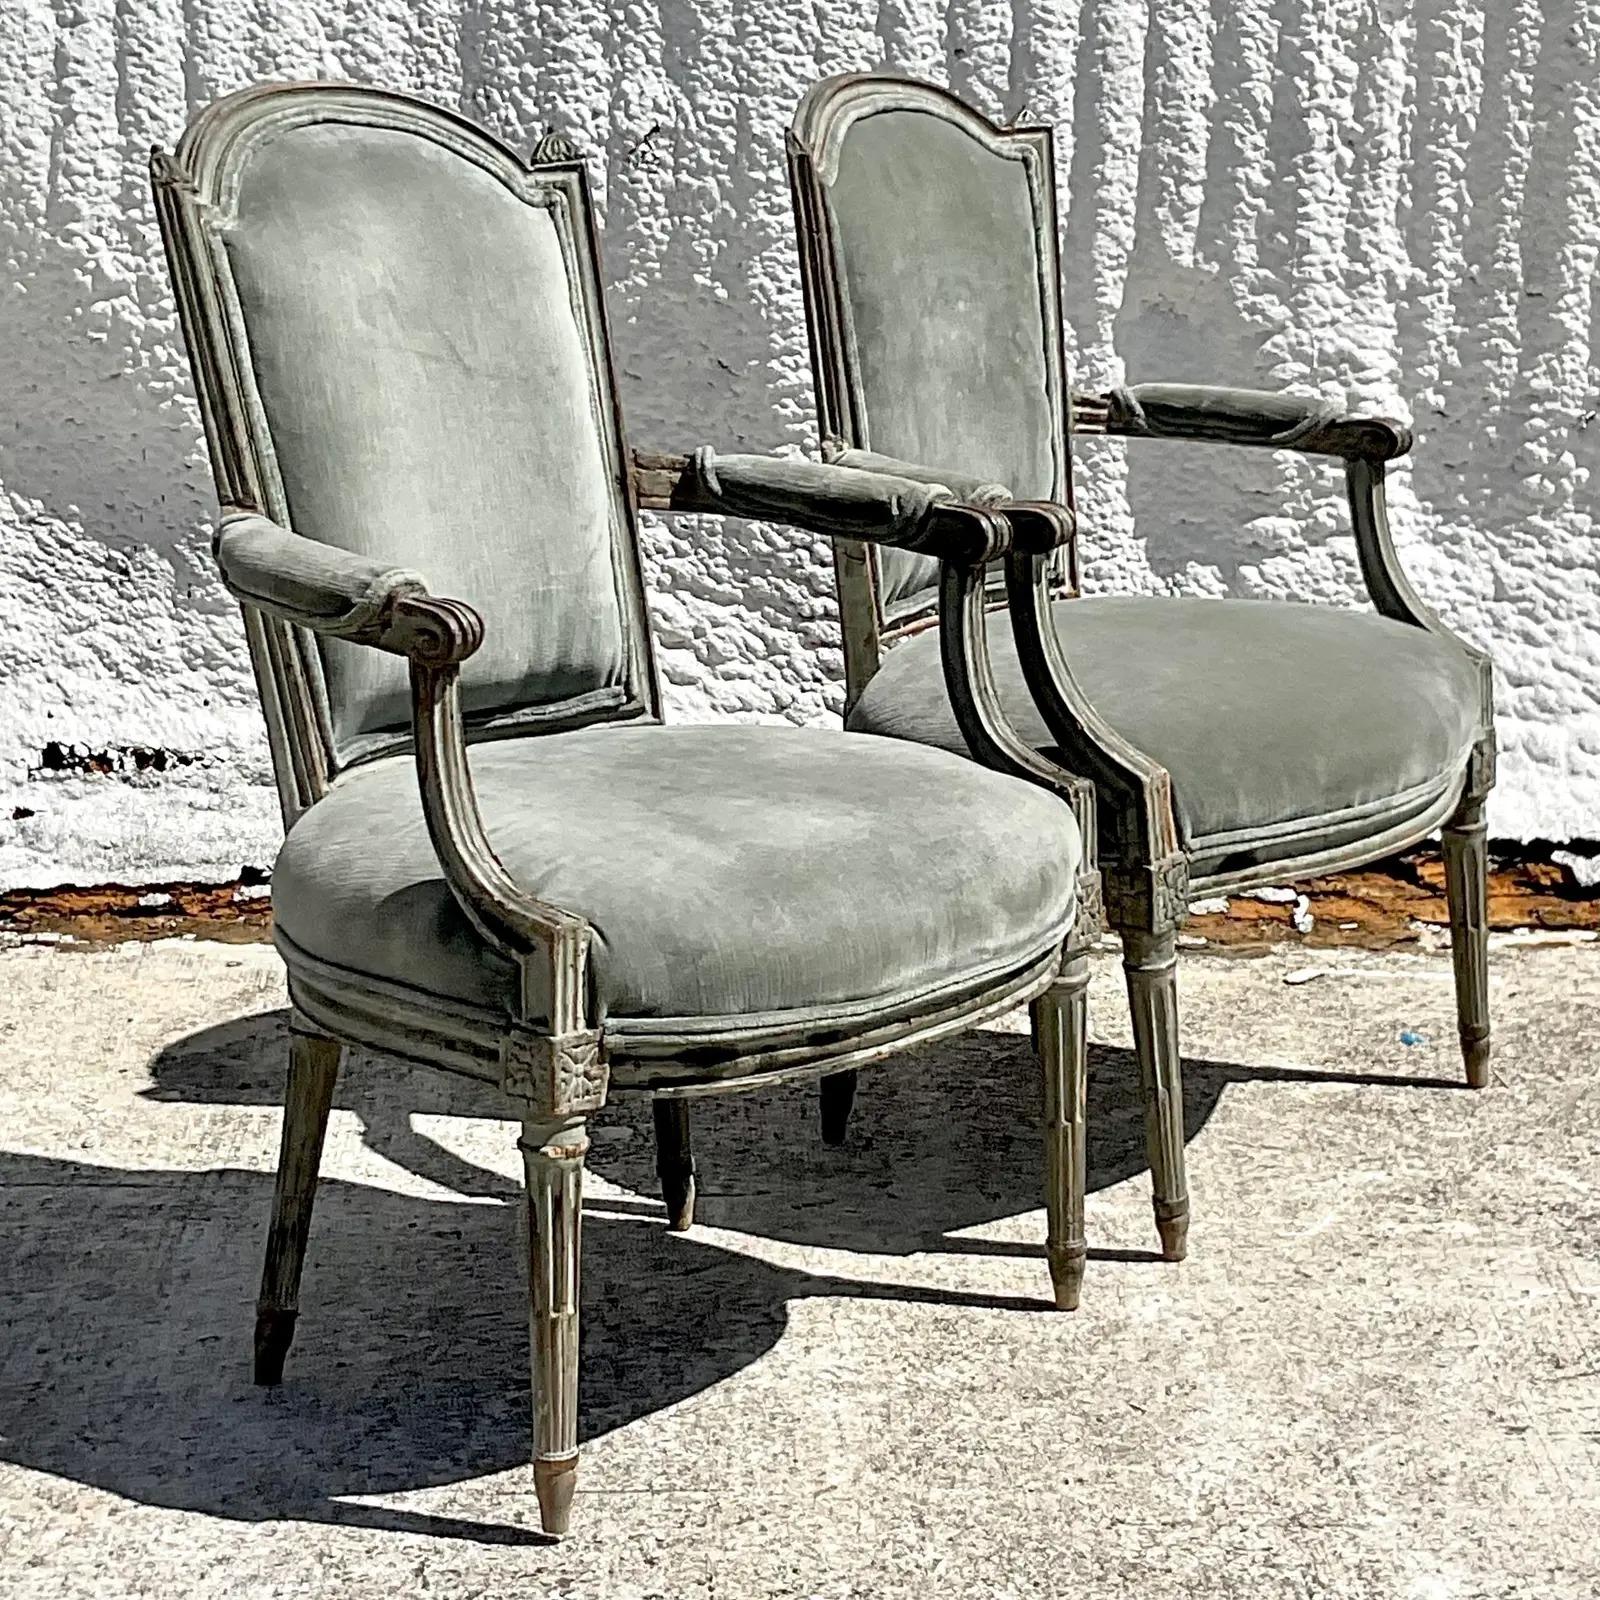 A fantastic set of two vintage Regency chairs. A chic set of 19th century Bergere chairs with amazing hand carved detail. Upholstered in a smoky grey velvet with double welting trim. Acquired from a Palm Beach estate.

The chairs are in great